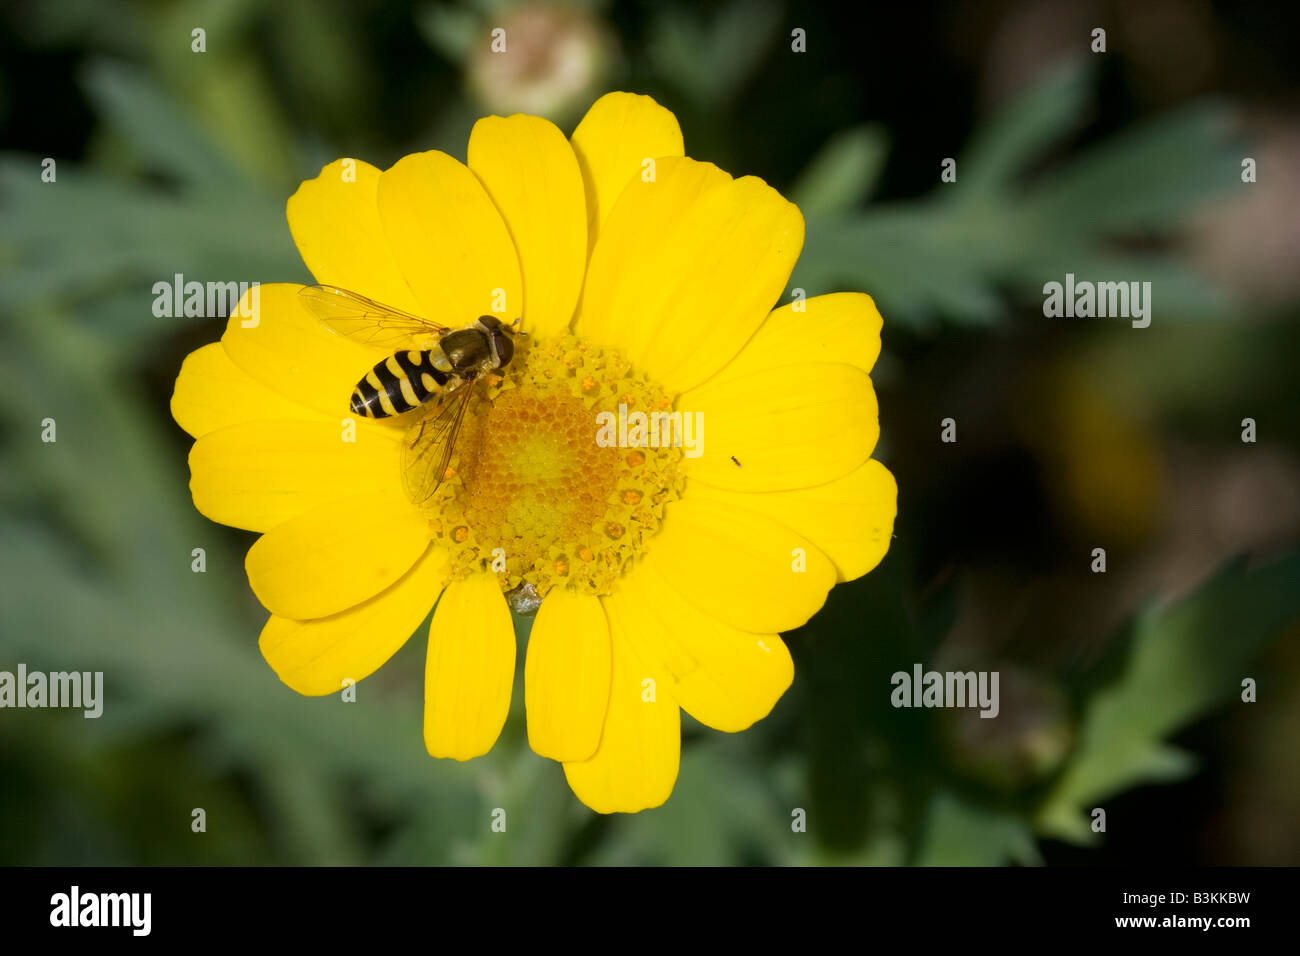 Syrphus ribesii a very common European species of hoverfly on a yellow flower Its larva feed on aphids Stock Photo